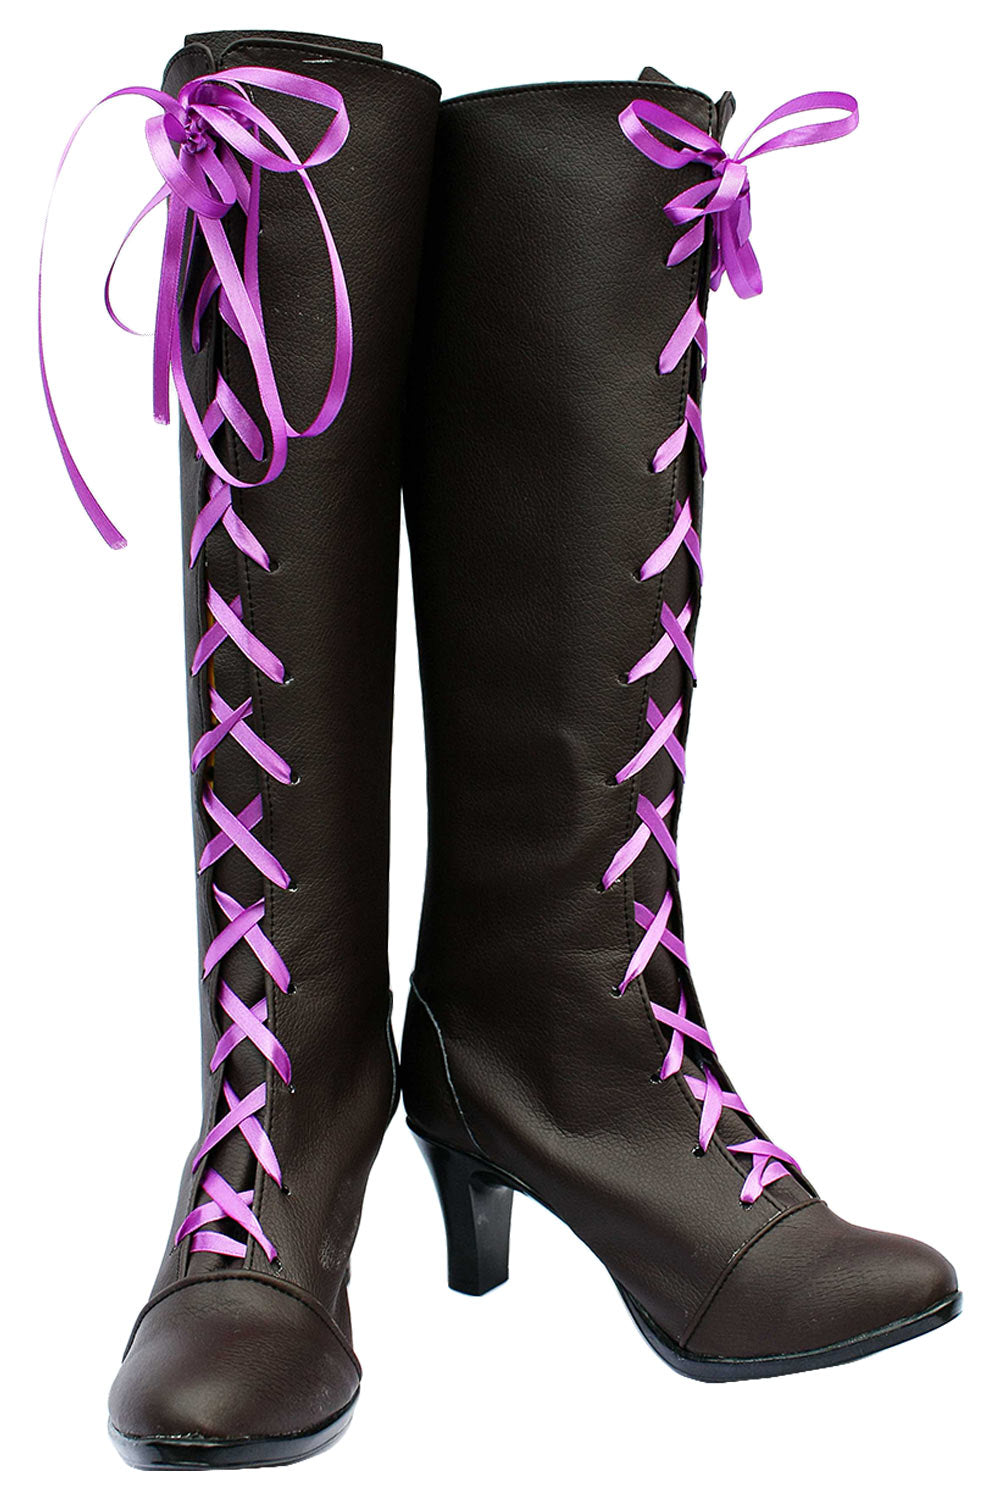 Black Butler Alois Trancy Cosplay Boots Shoes